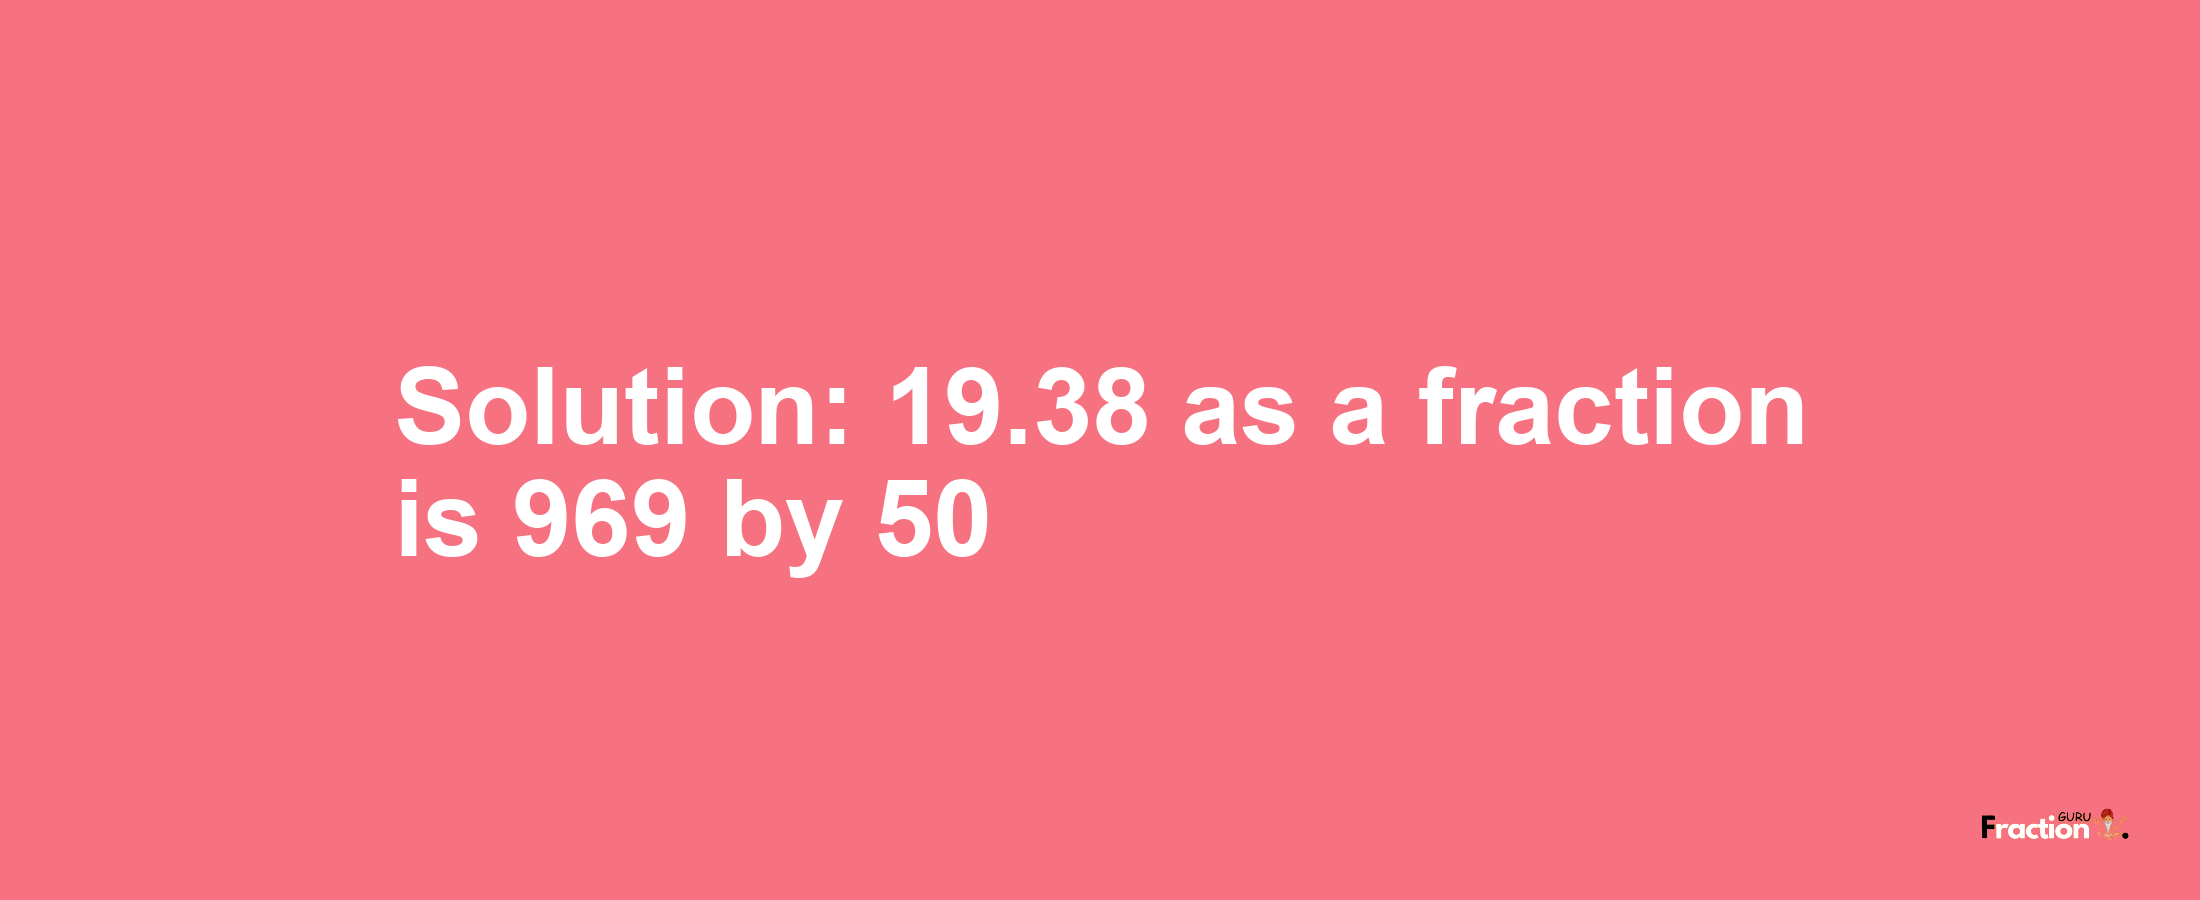 Solution:19.38 as a fraction is 969/50